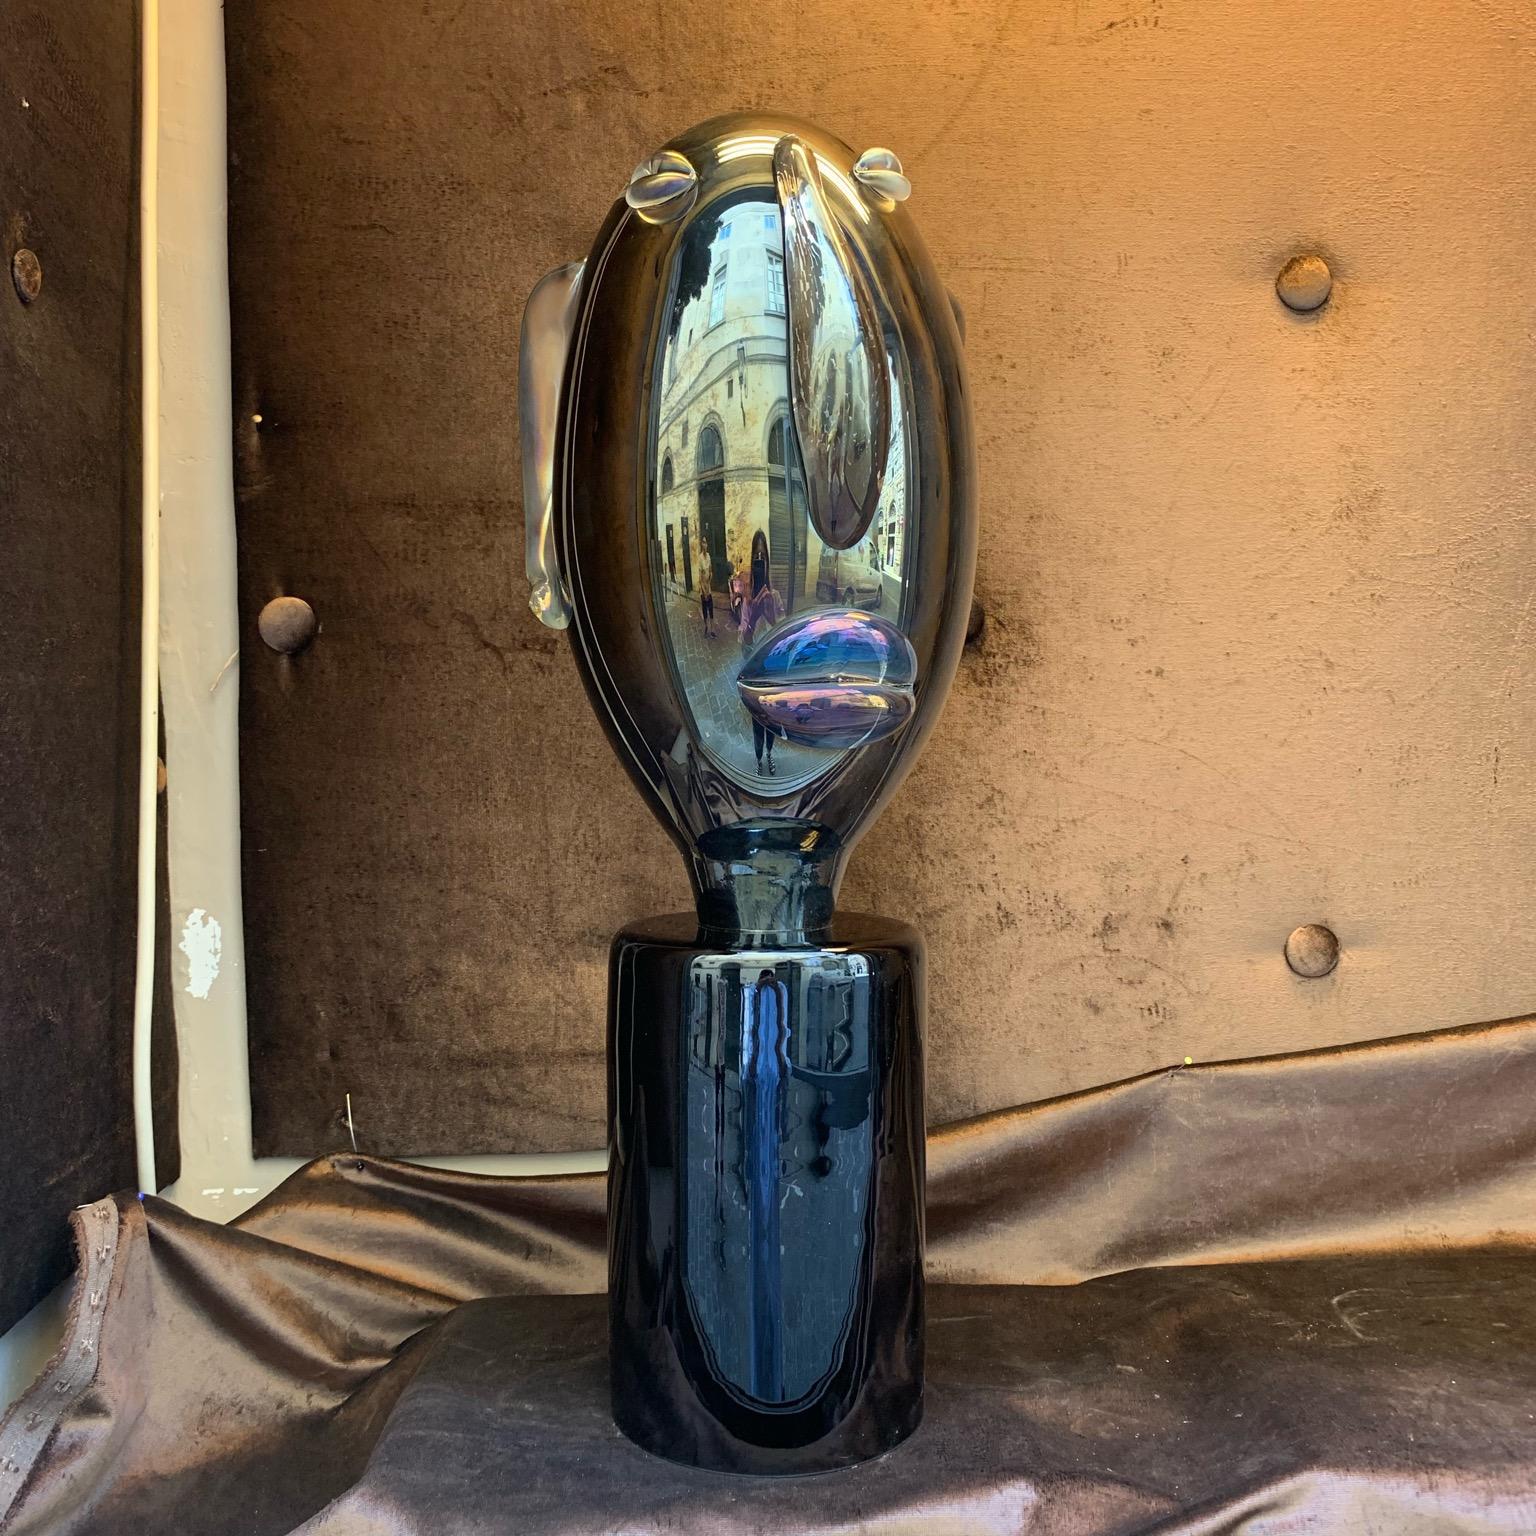 Modernist Murano glass sculpture head shaped Picasso style on black glass round base. The elongated head is in mirrored and iridescent Murano glass. The pair is available. Measurements of the base: diameter cm 17 x height cm 24.